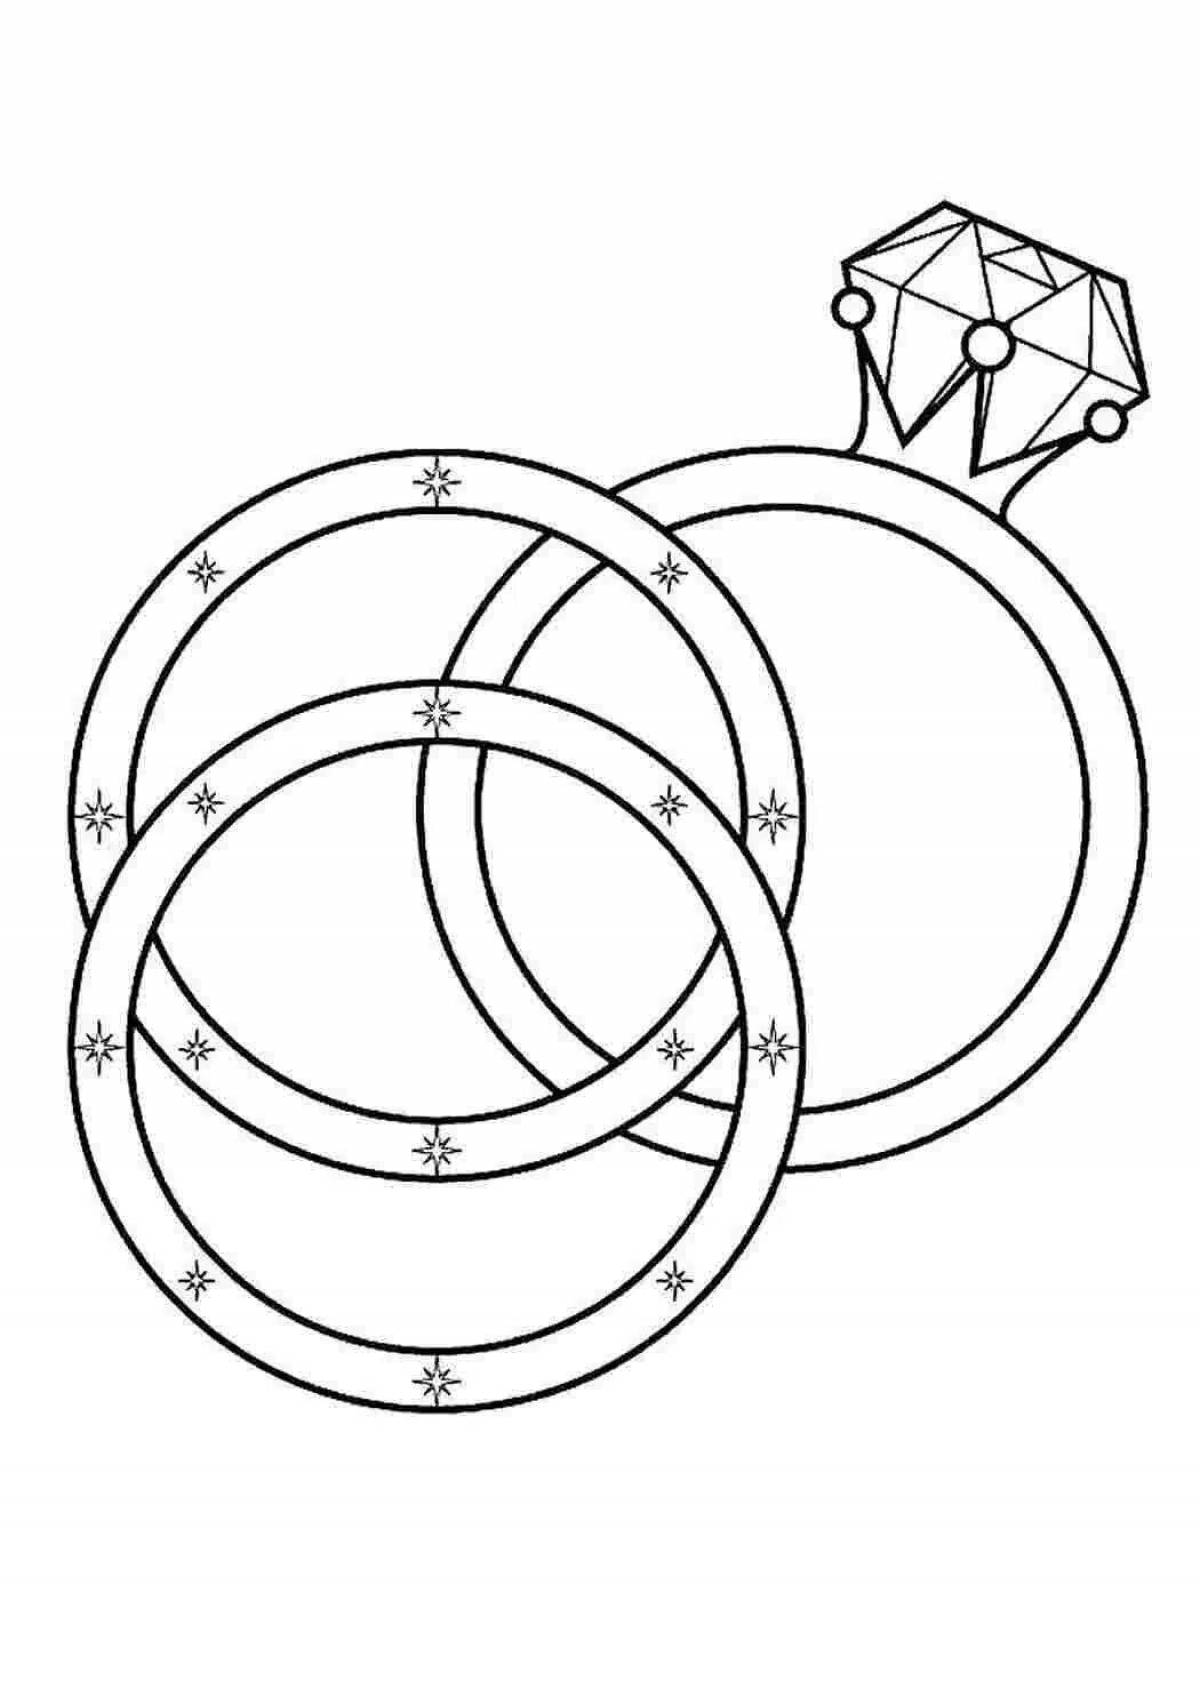 Fun ring coloring page for kids